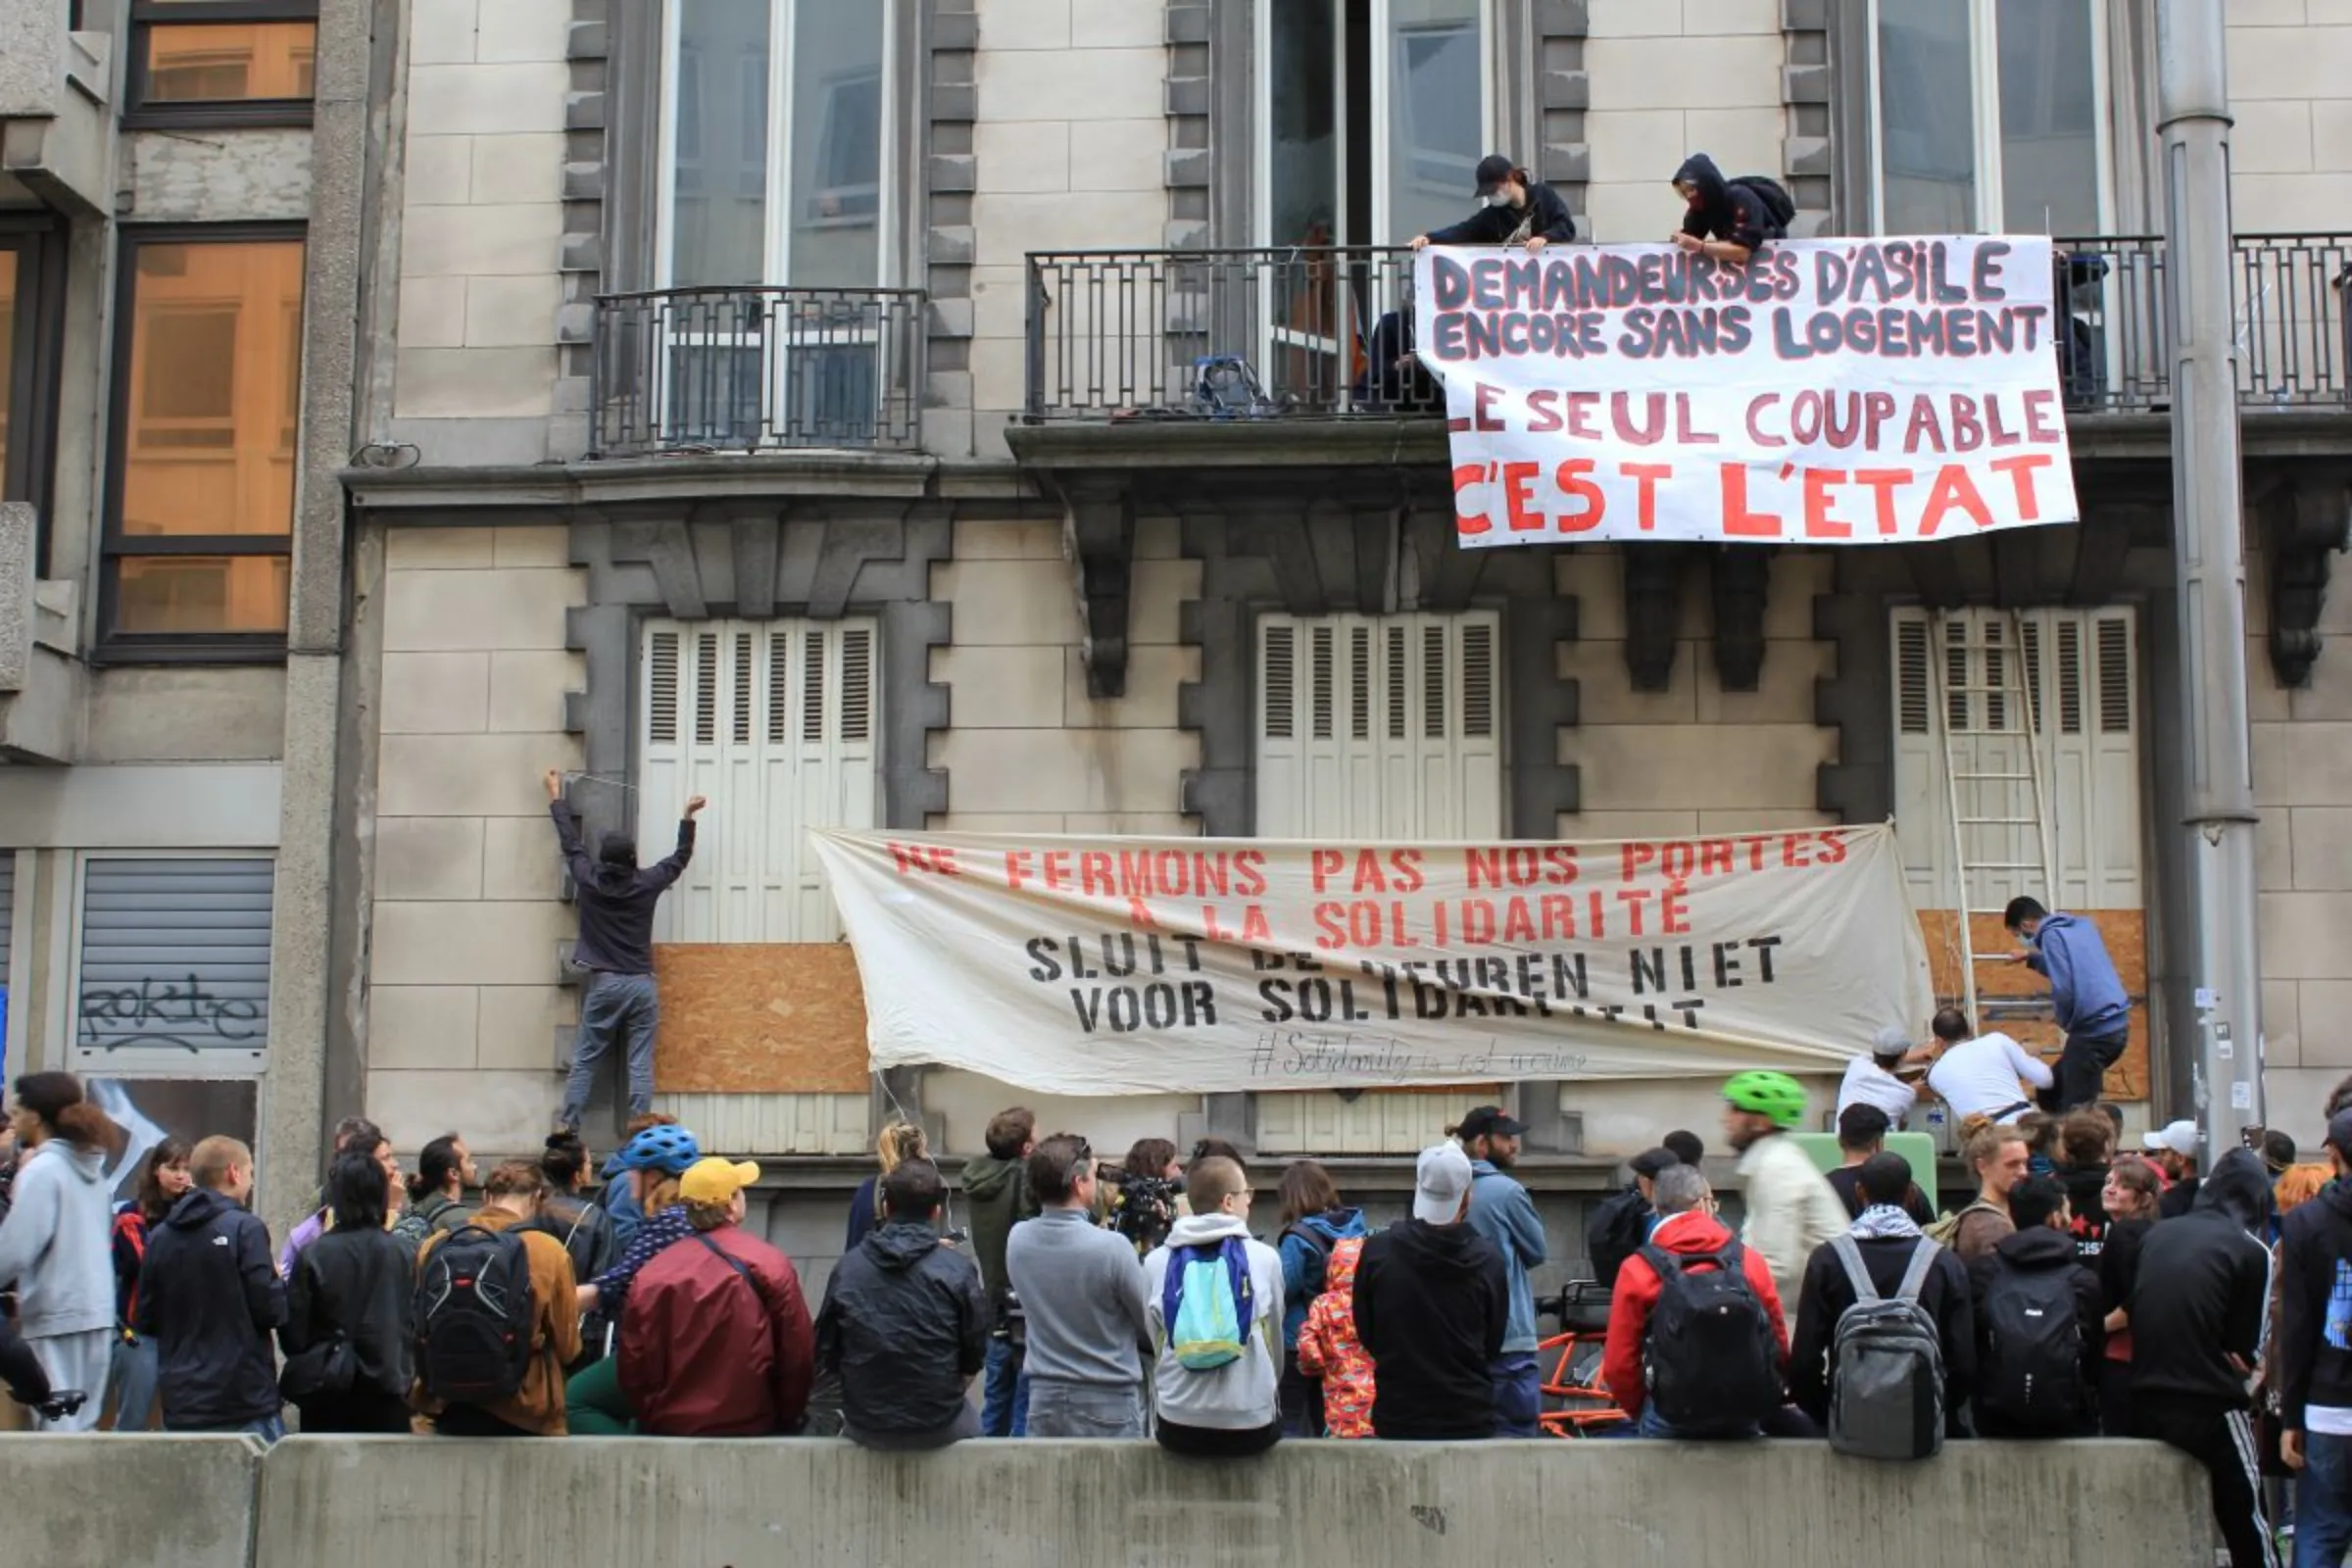 Homeless asylum seekers and citizens demonstrate against eviction from Brussels squat. Belgium August 31 2023